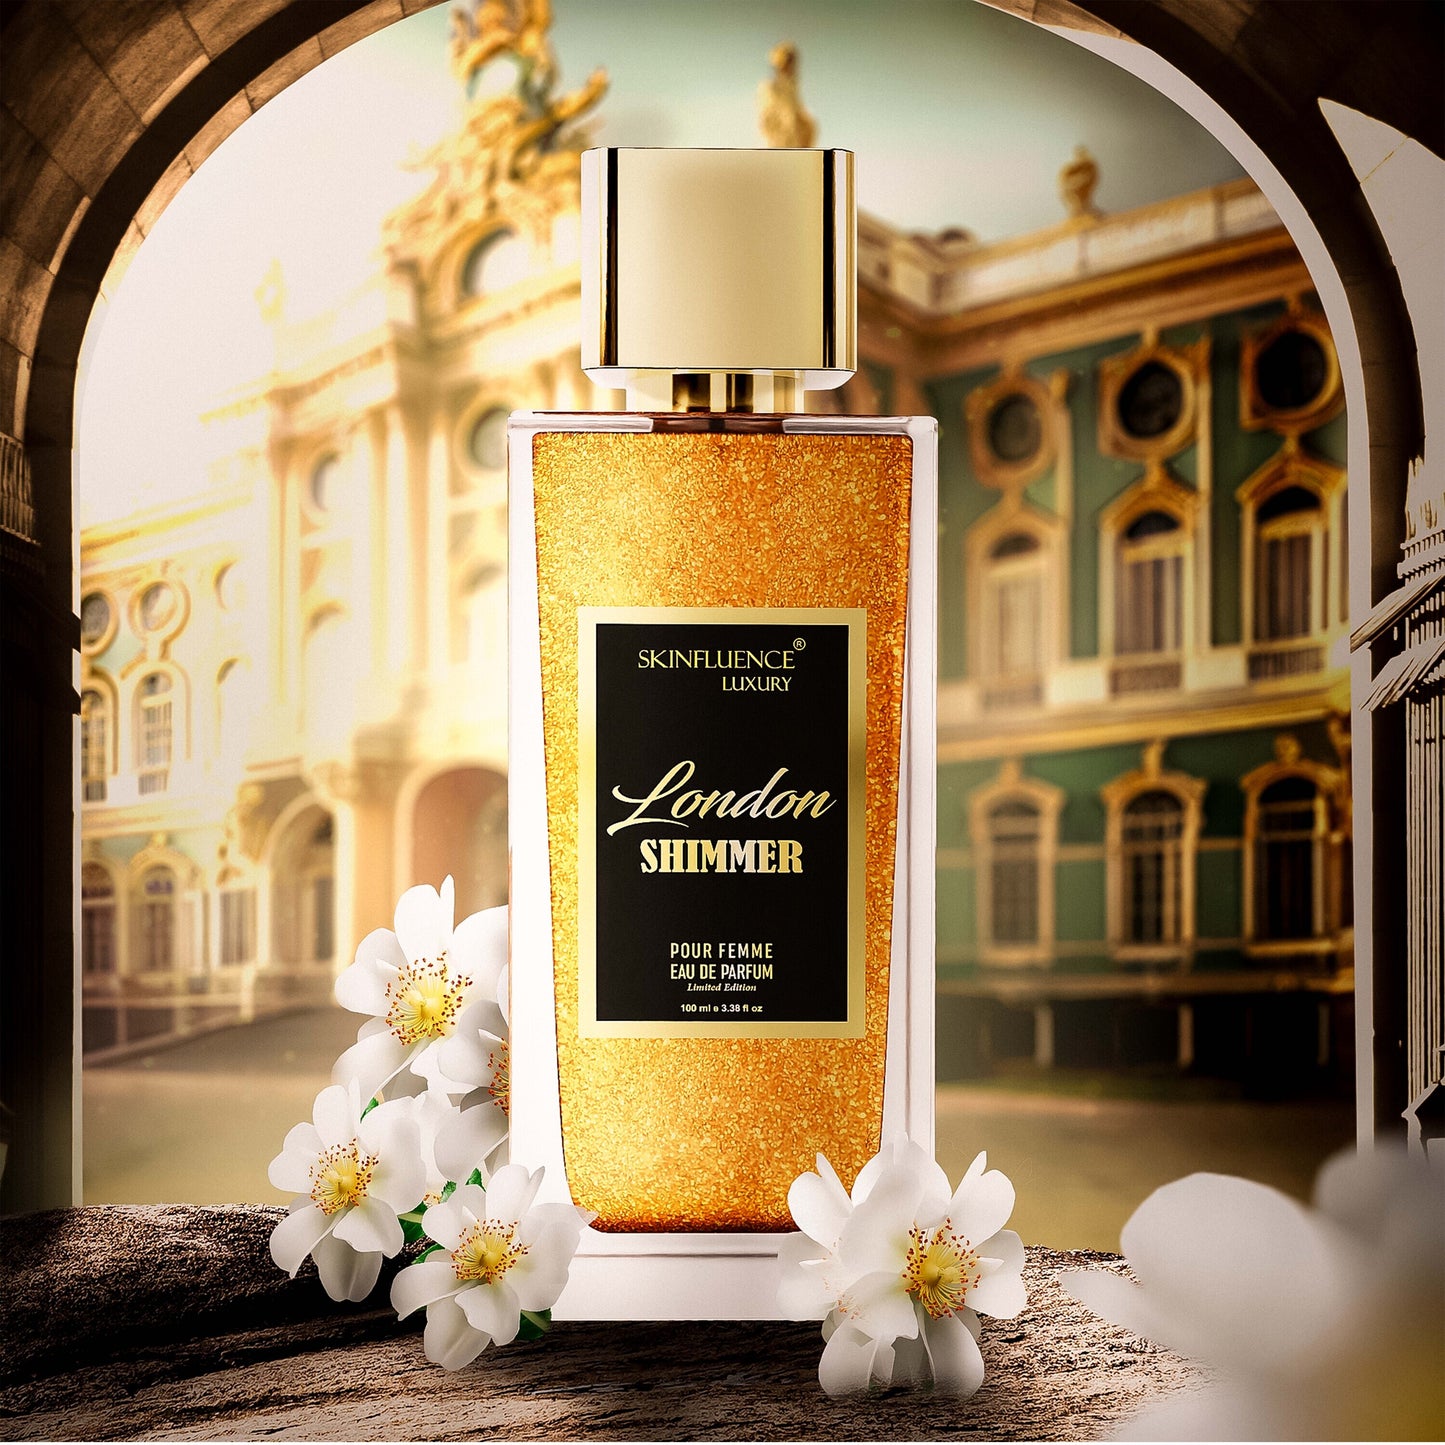 Experience the Elegance: London Shimmer for Her - India's First Shimmer Party Perfume by Skinfluence Luxury. A dazzling scent that radiates charm and femininity, adding a touch of shimmer to your night.